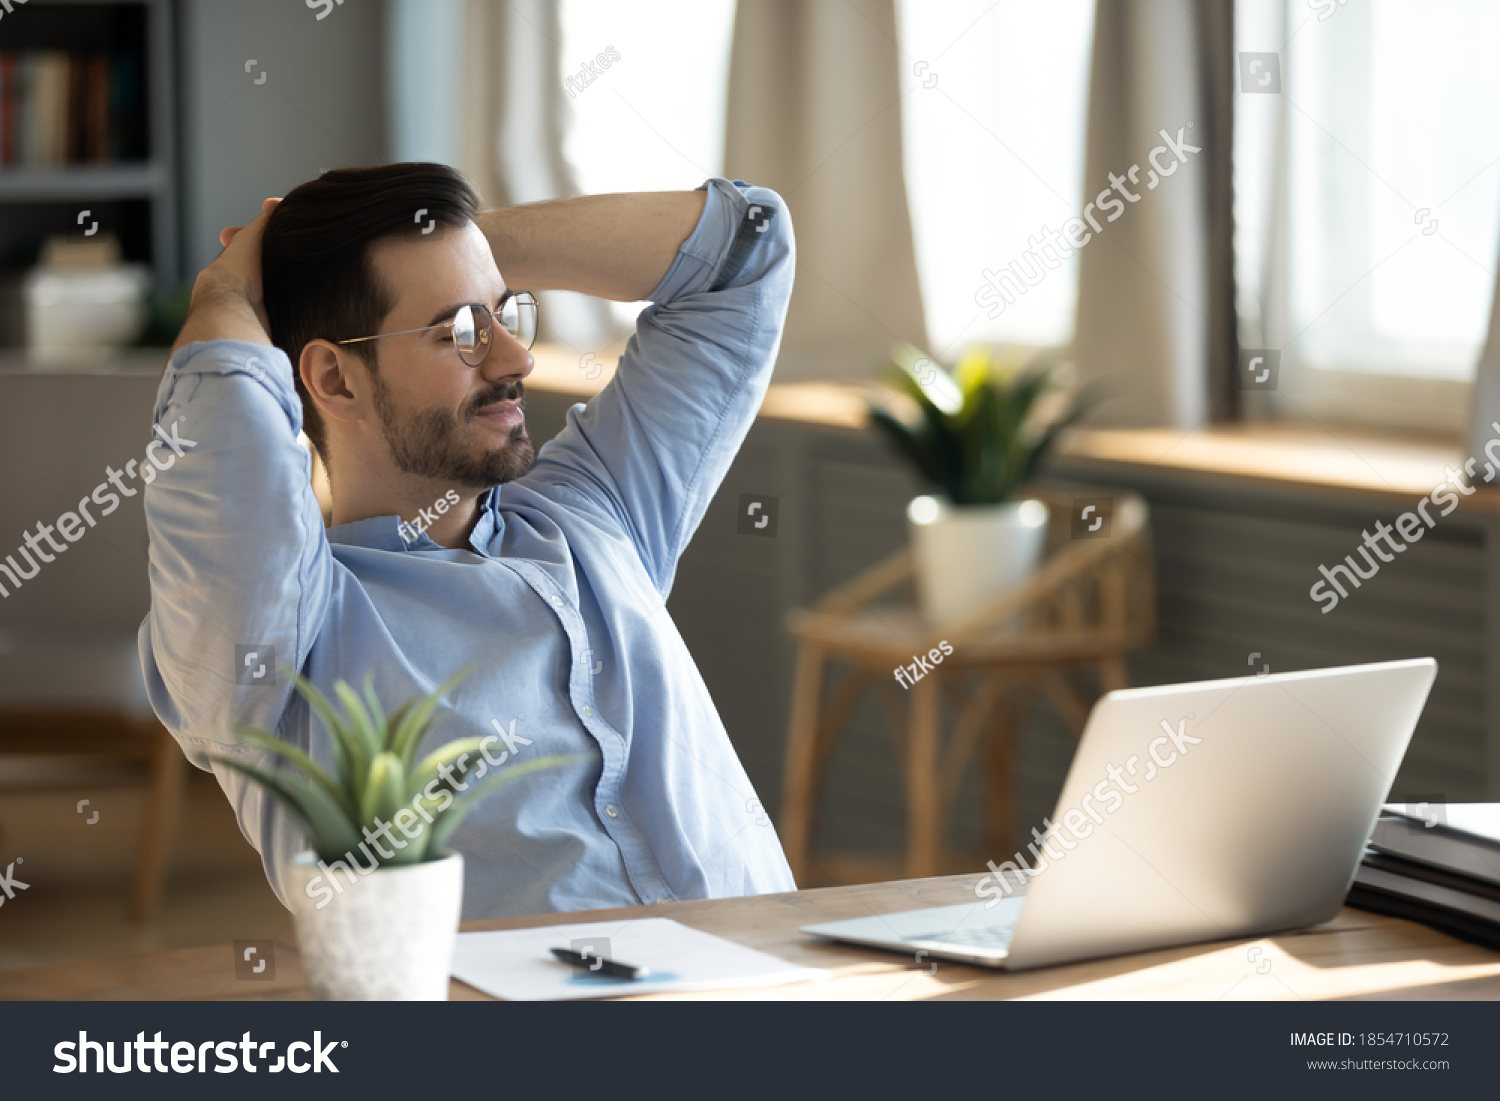 Handsome young businessman resting at workplace lean on comfort chair closed eyes enjoy fresh conditioned air. Satisfied employee finish work feels serene relaxing in modern office, no stress concept #1854710572